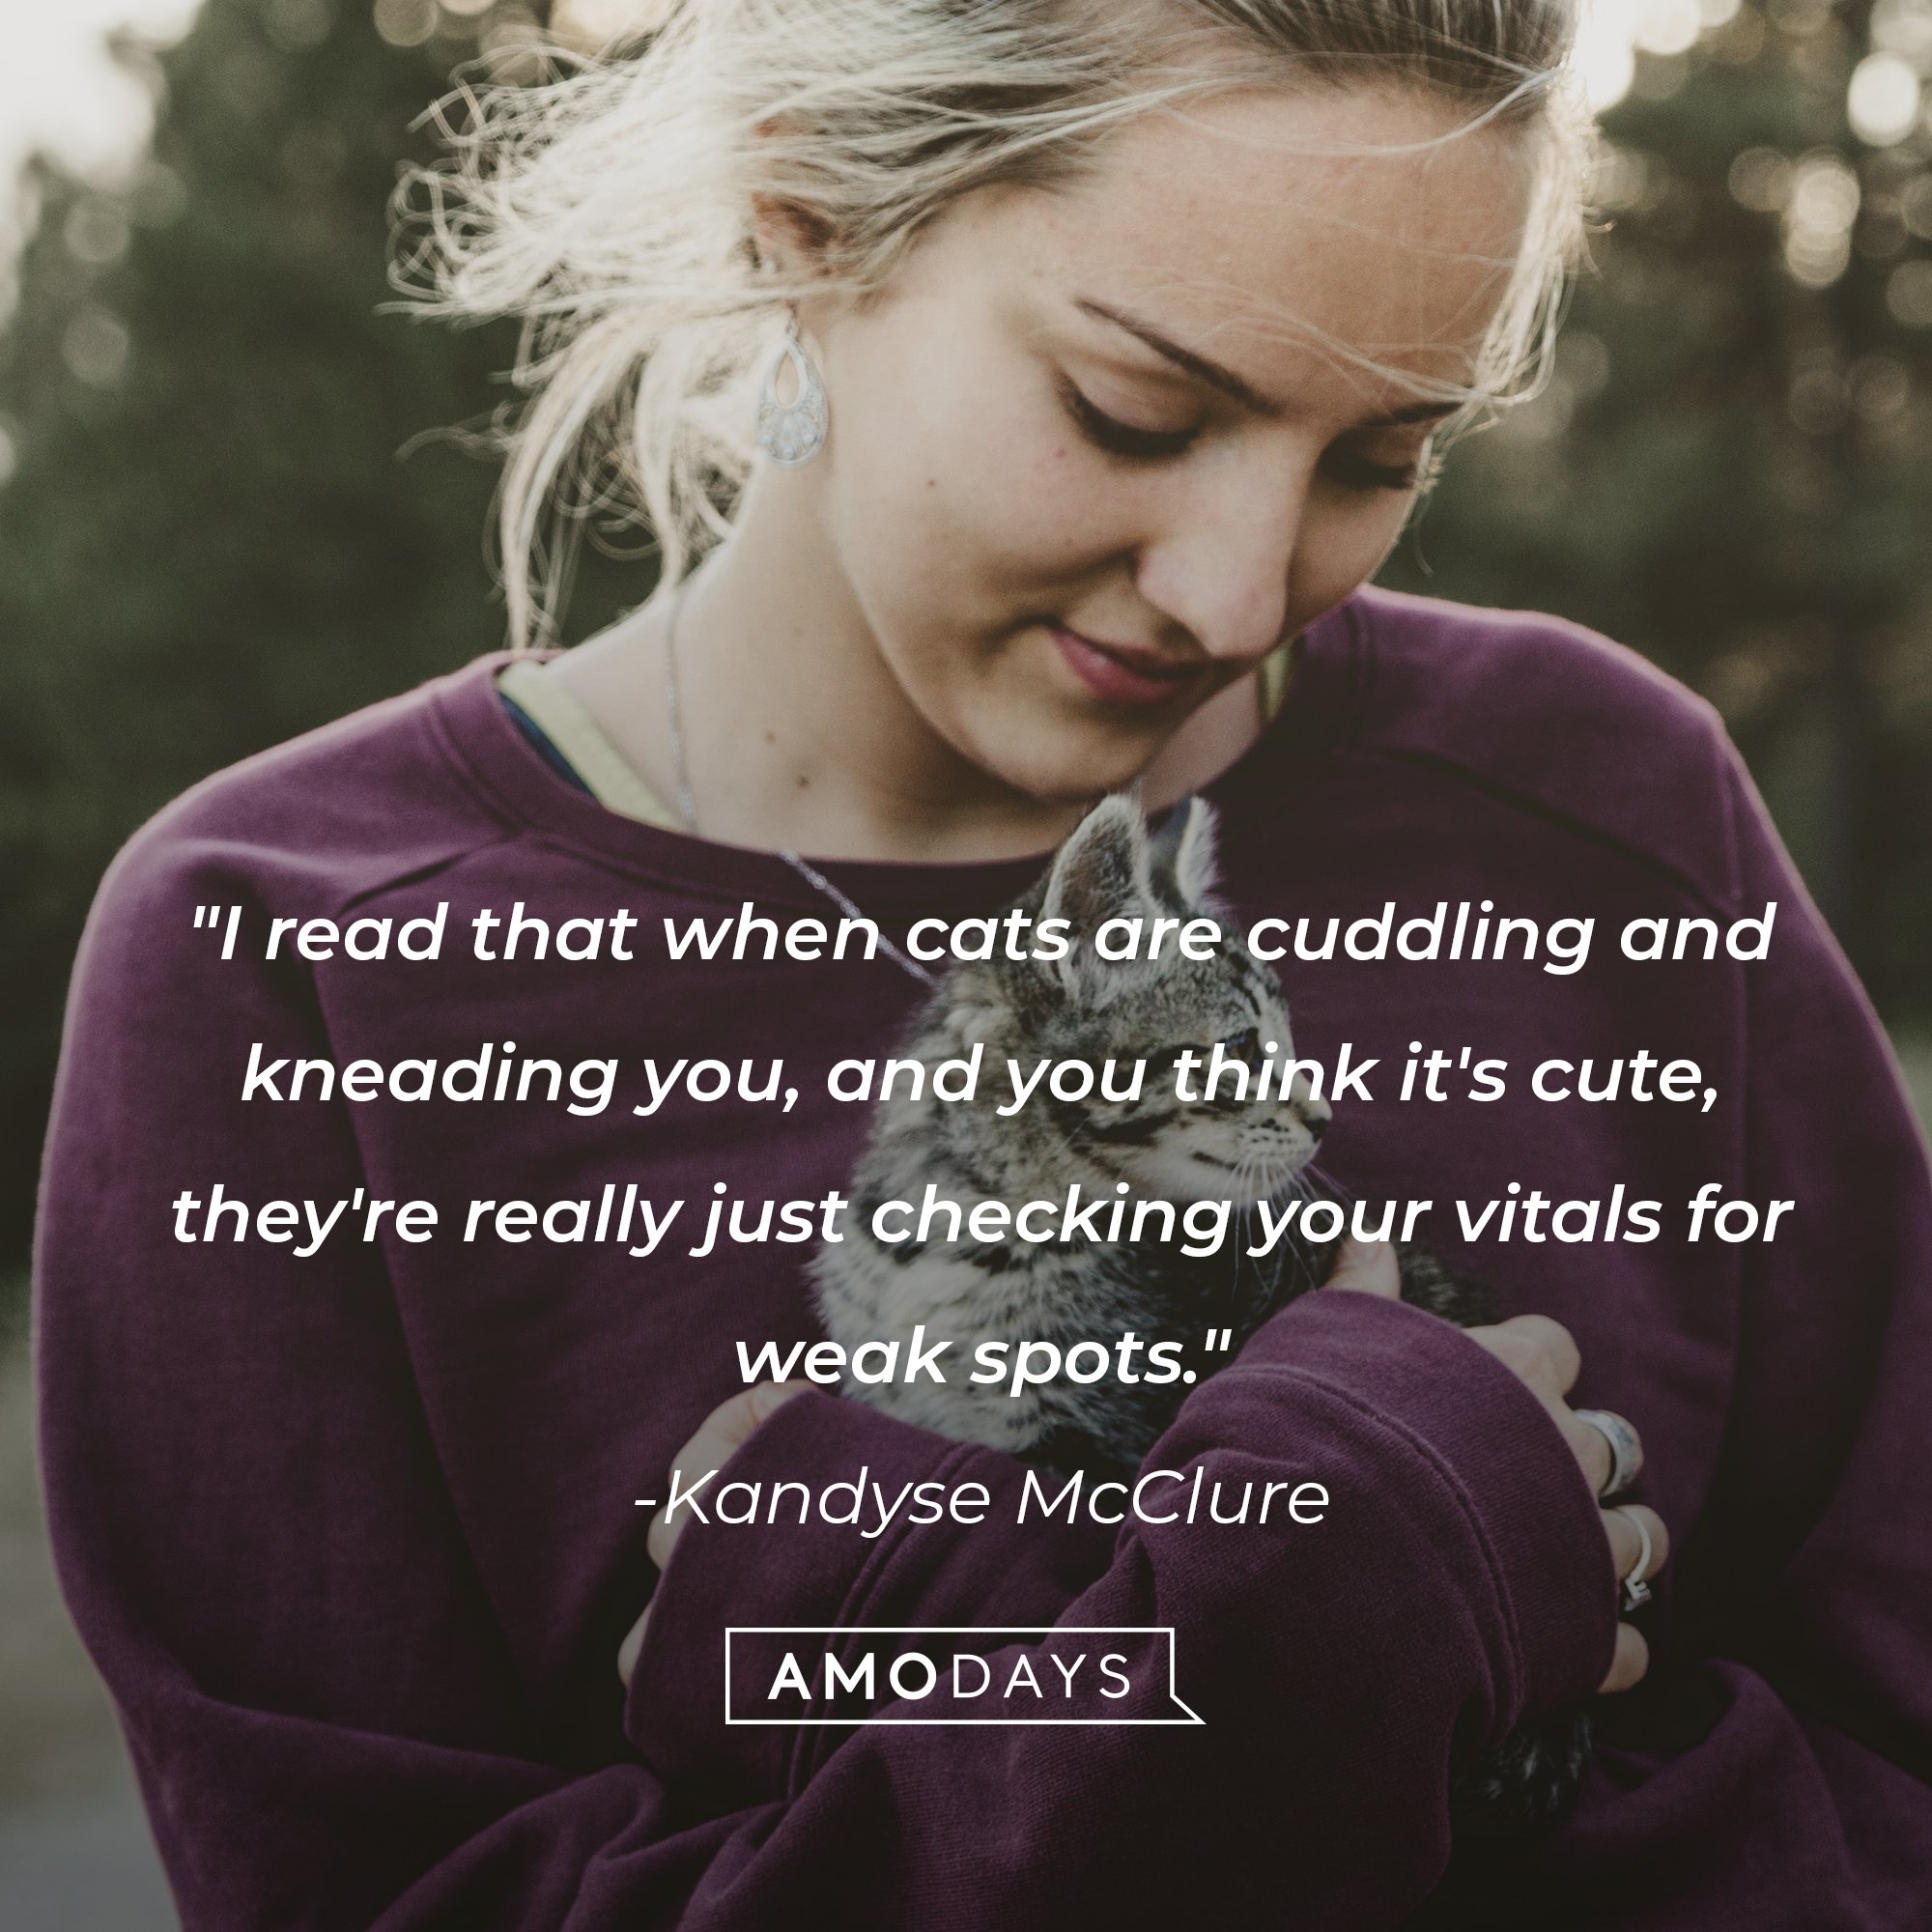 Kandyse McClure's quote: "I read that when cats are cuddling and kneading you, and you think it's cute, they're really just checking your vitals for weak spots." | Image: AmoDays